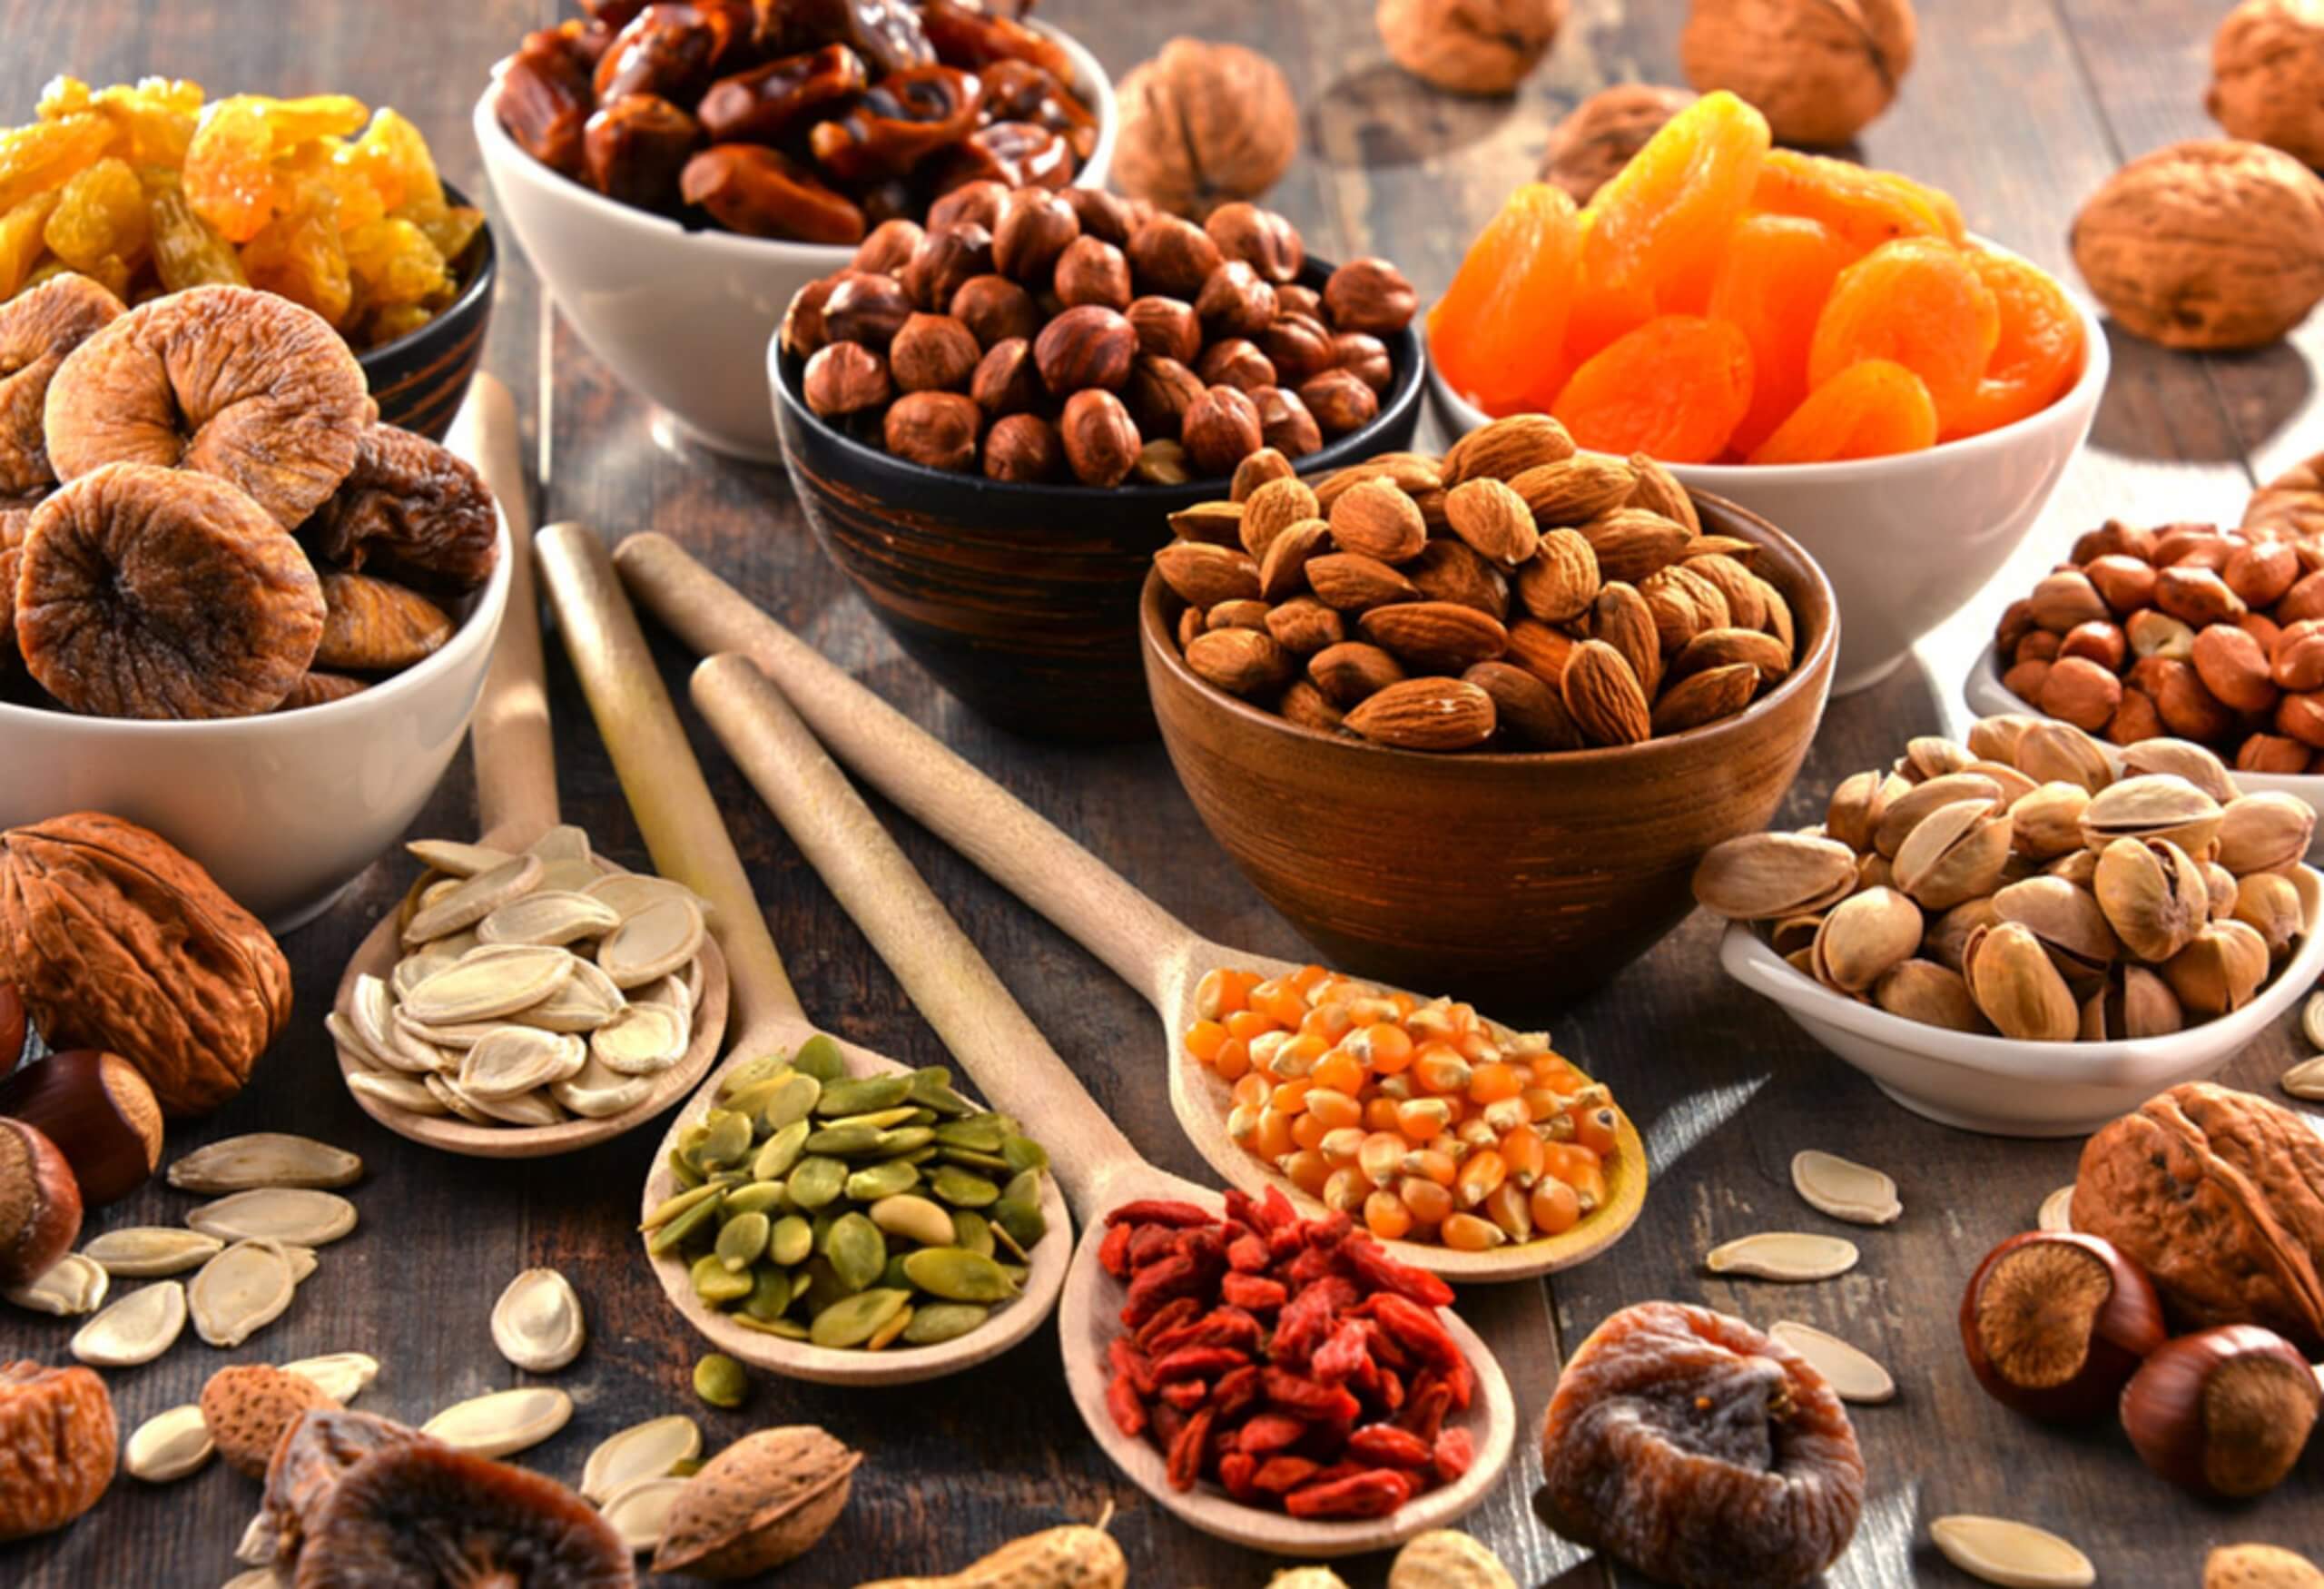 These dry fruits will keep the body cool in summer, know the right way to eat them